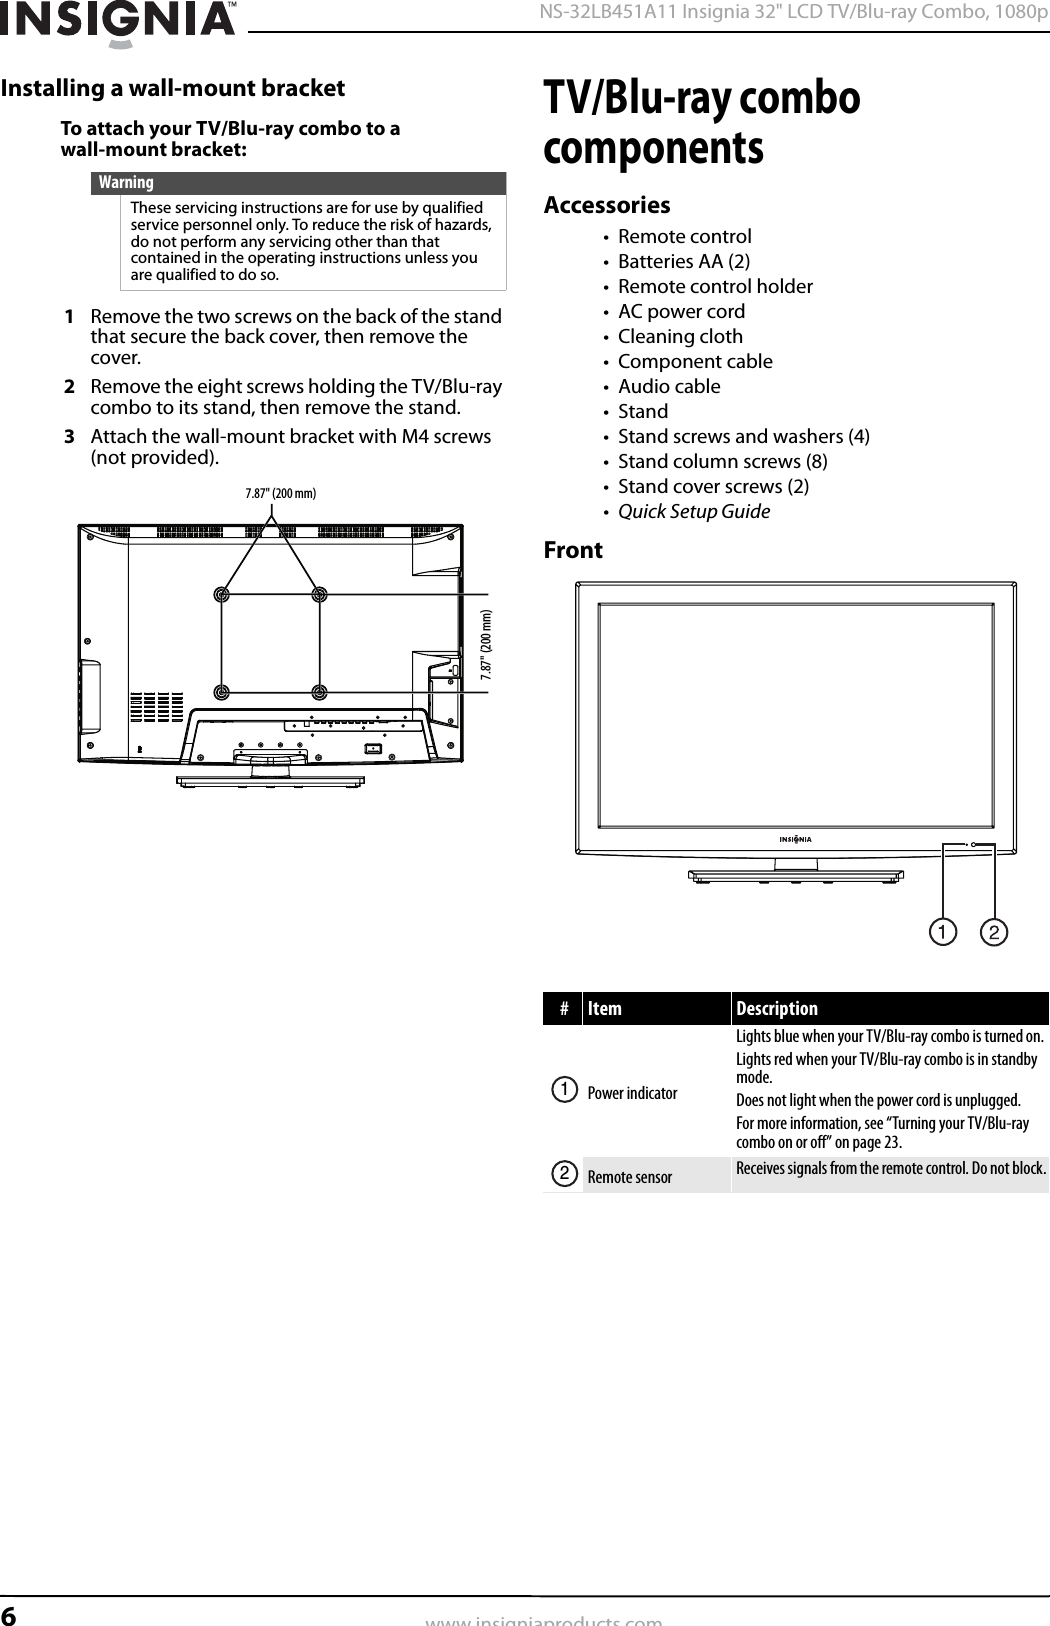 6NS-32LB451A11 Insignia 32&quot; LCD TV/Blu-ray Combo, 1080pwww.insigniaproducts.comInstalling a wall-mount bracketTo attach your TV/Blu-ray combo to a wall-mount bracket:1Remove the two screws on the back of the stand that secure the back cover, then remove the cover.2Remove the eight screws holding the TV/Blu-ray combo to its stand, then remove the stand.3Attach the wall-mount bracket with M4 screws (not provided).TV/Blu-ray combo componentsAccessories• Remote control• Batteries AA (2)• Remote control holder•AC power cord• Cleaning cloth•Component cable•Audio cable•Stand• Stand screws and washers (4)•Stand column screws (8)• Stand cover screws (2)• Quick Setup GuideFrontWarningThese servicing instructions are for use by qualified service personnel only. To reduce the risk of hazards, do not perform any servicing other than that contained in the operating instructions unless you are qualified to do so.7.87&quot; (200 mm)7.87&quot; (200 mm)#Item DescriptionPower indicatorLights blue when your TV/Blu-ray combo is turned on.Lights red when your TV/Blu-ray combo is in standby mode.Does not light when the power cord is unplugged.For more information, see “Turning your TV/Blu-ray combo on or off” on page 23.Remote sensor Receives signals from the remote control. Do not block.12